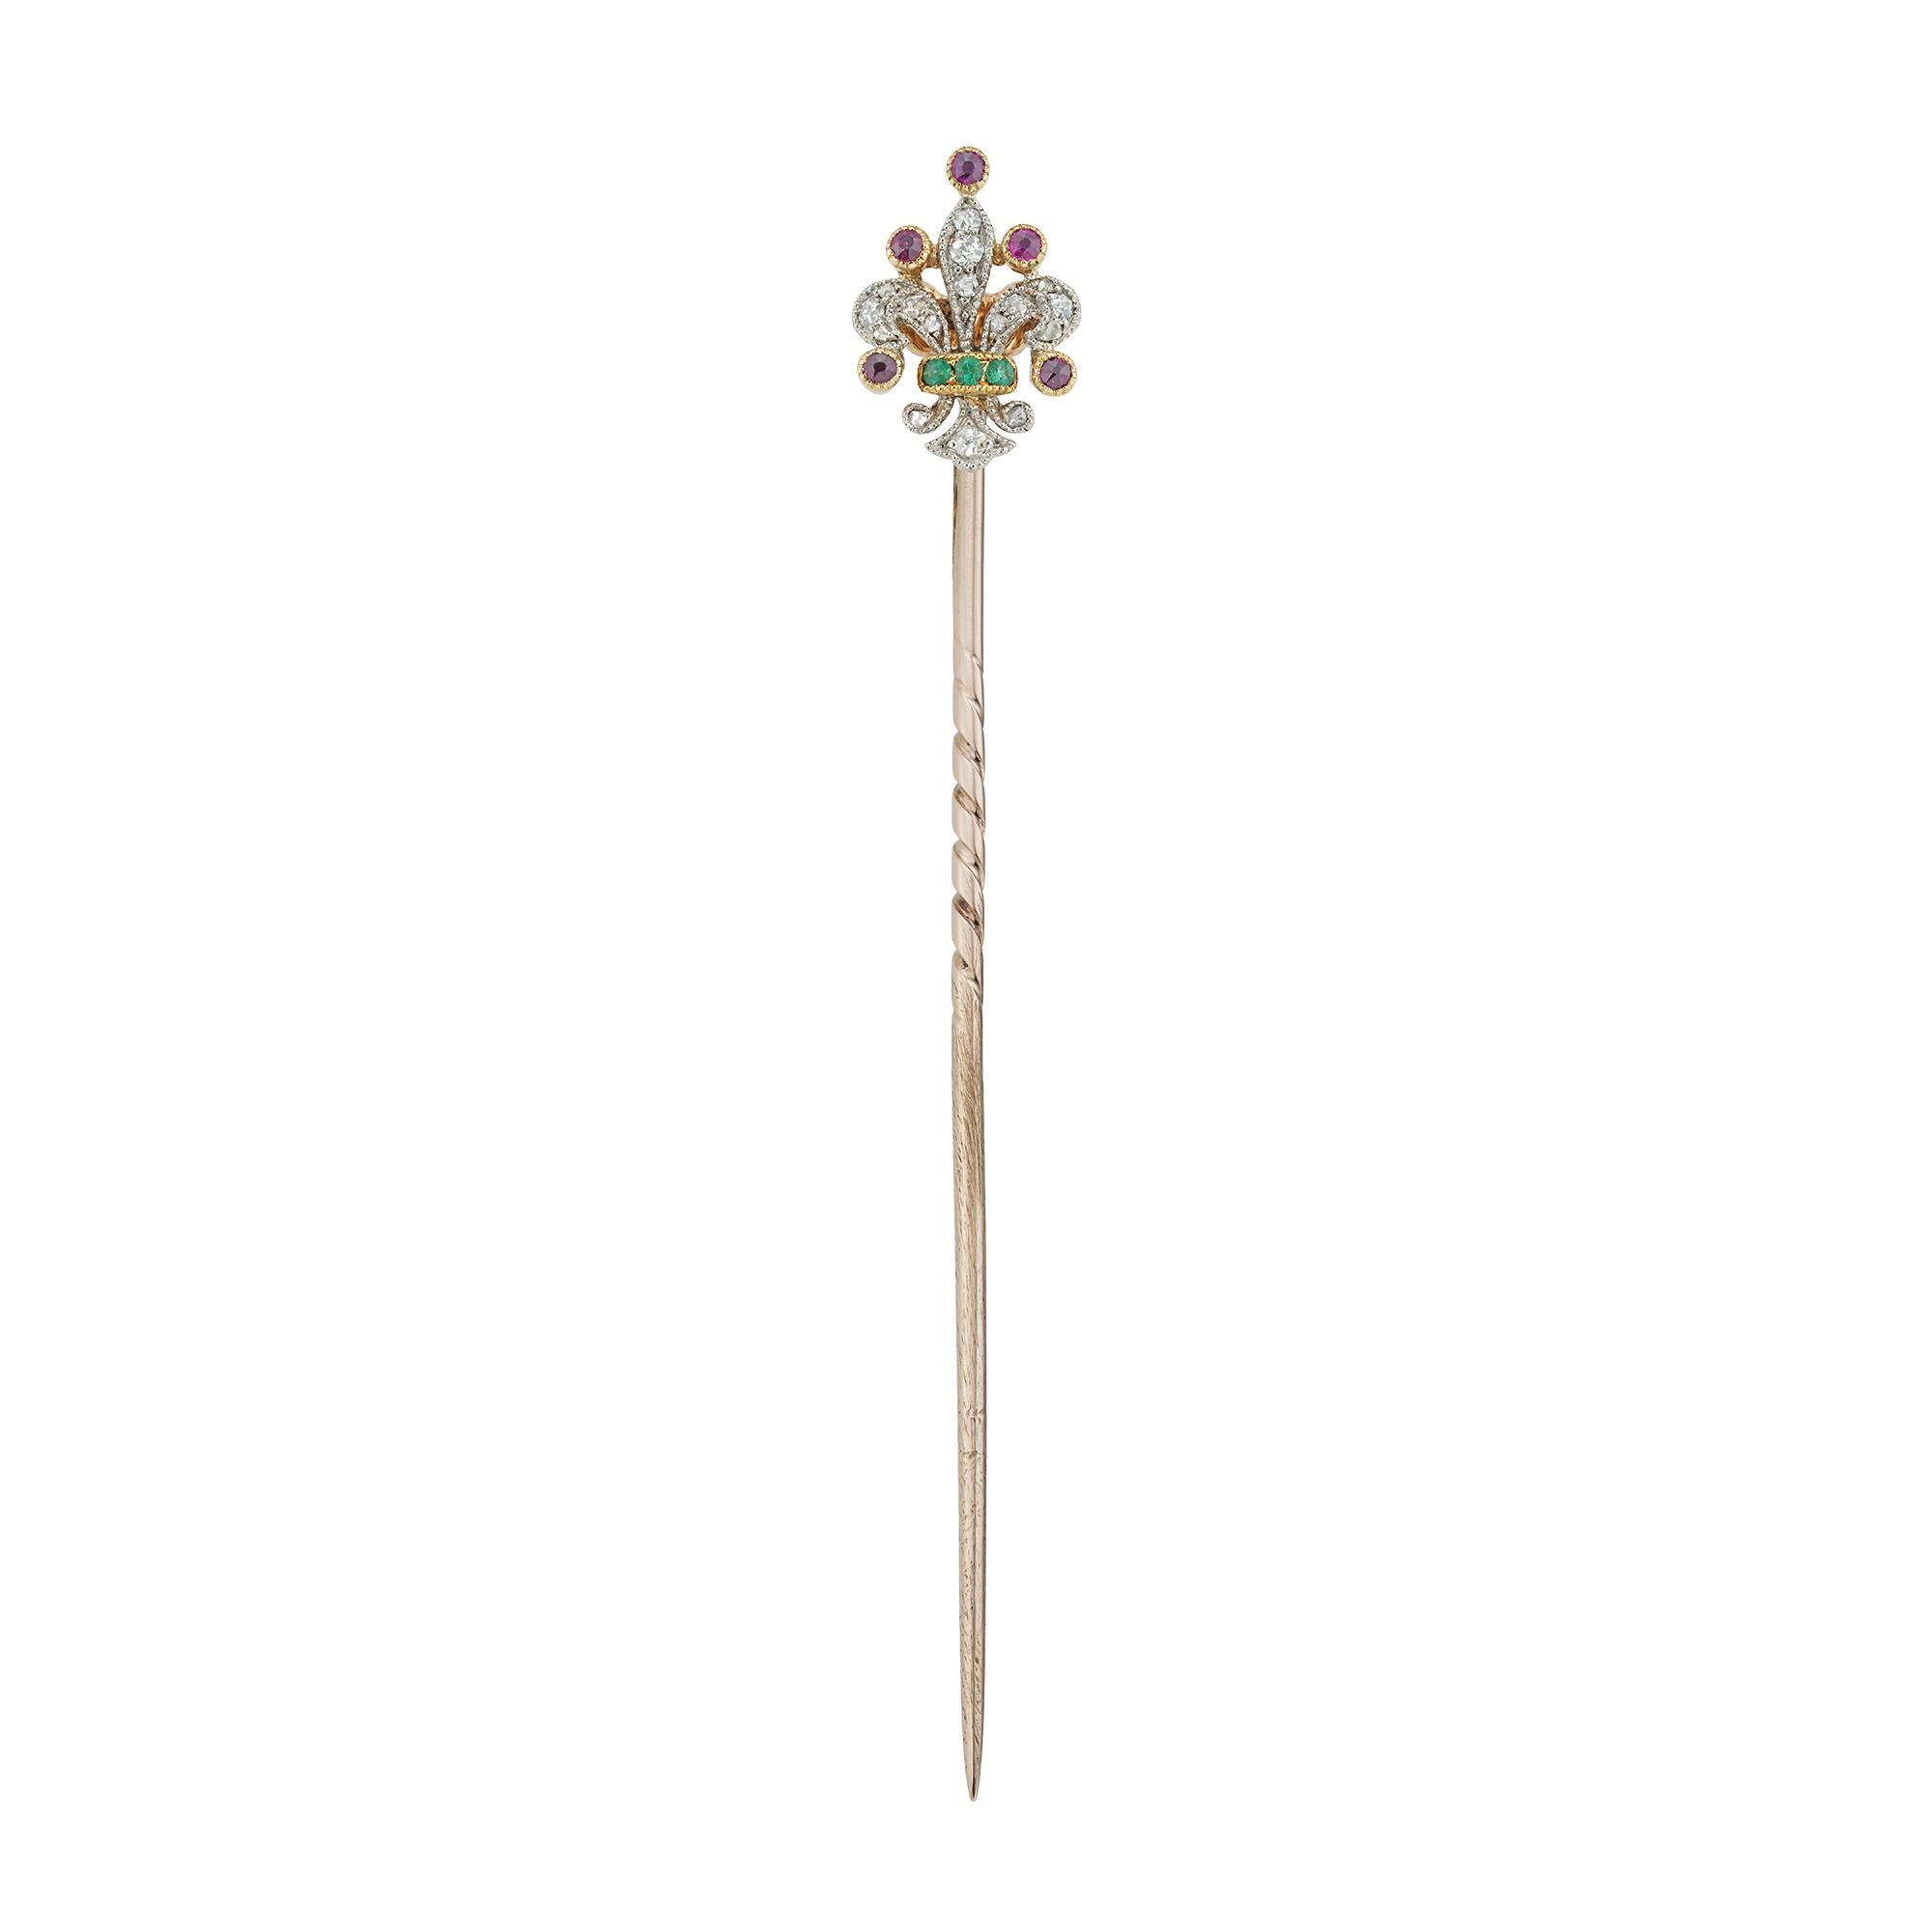 An Edwardian Fleur-de-lis gem-set stick-pin, set with old European and rose-cut diamonds estimated to weigh ¼ carat in total, embellished with three small round faceted emeralds and five small round faceted rubies, all millegrain-set in platinum and